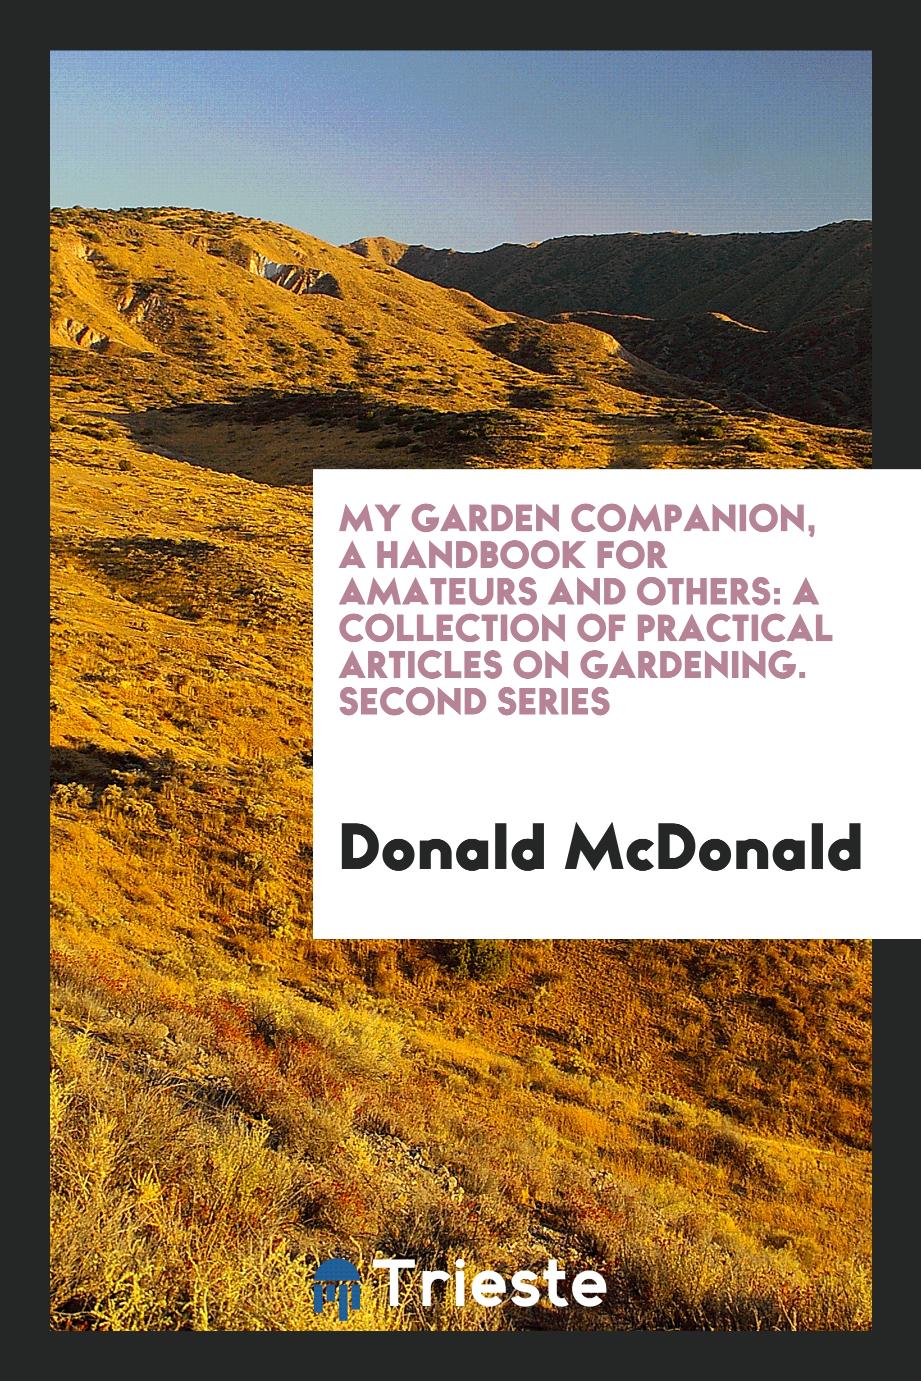 My Garden Companion, a Handbook for Amateurs and Others: A Collection of Practical Articles on Gardening. Second Series